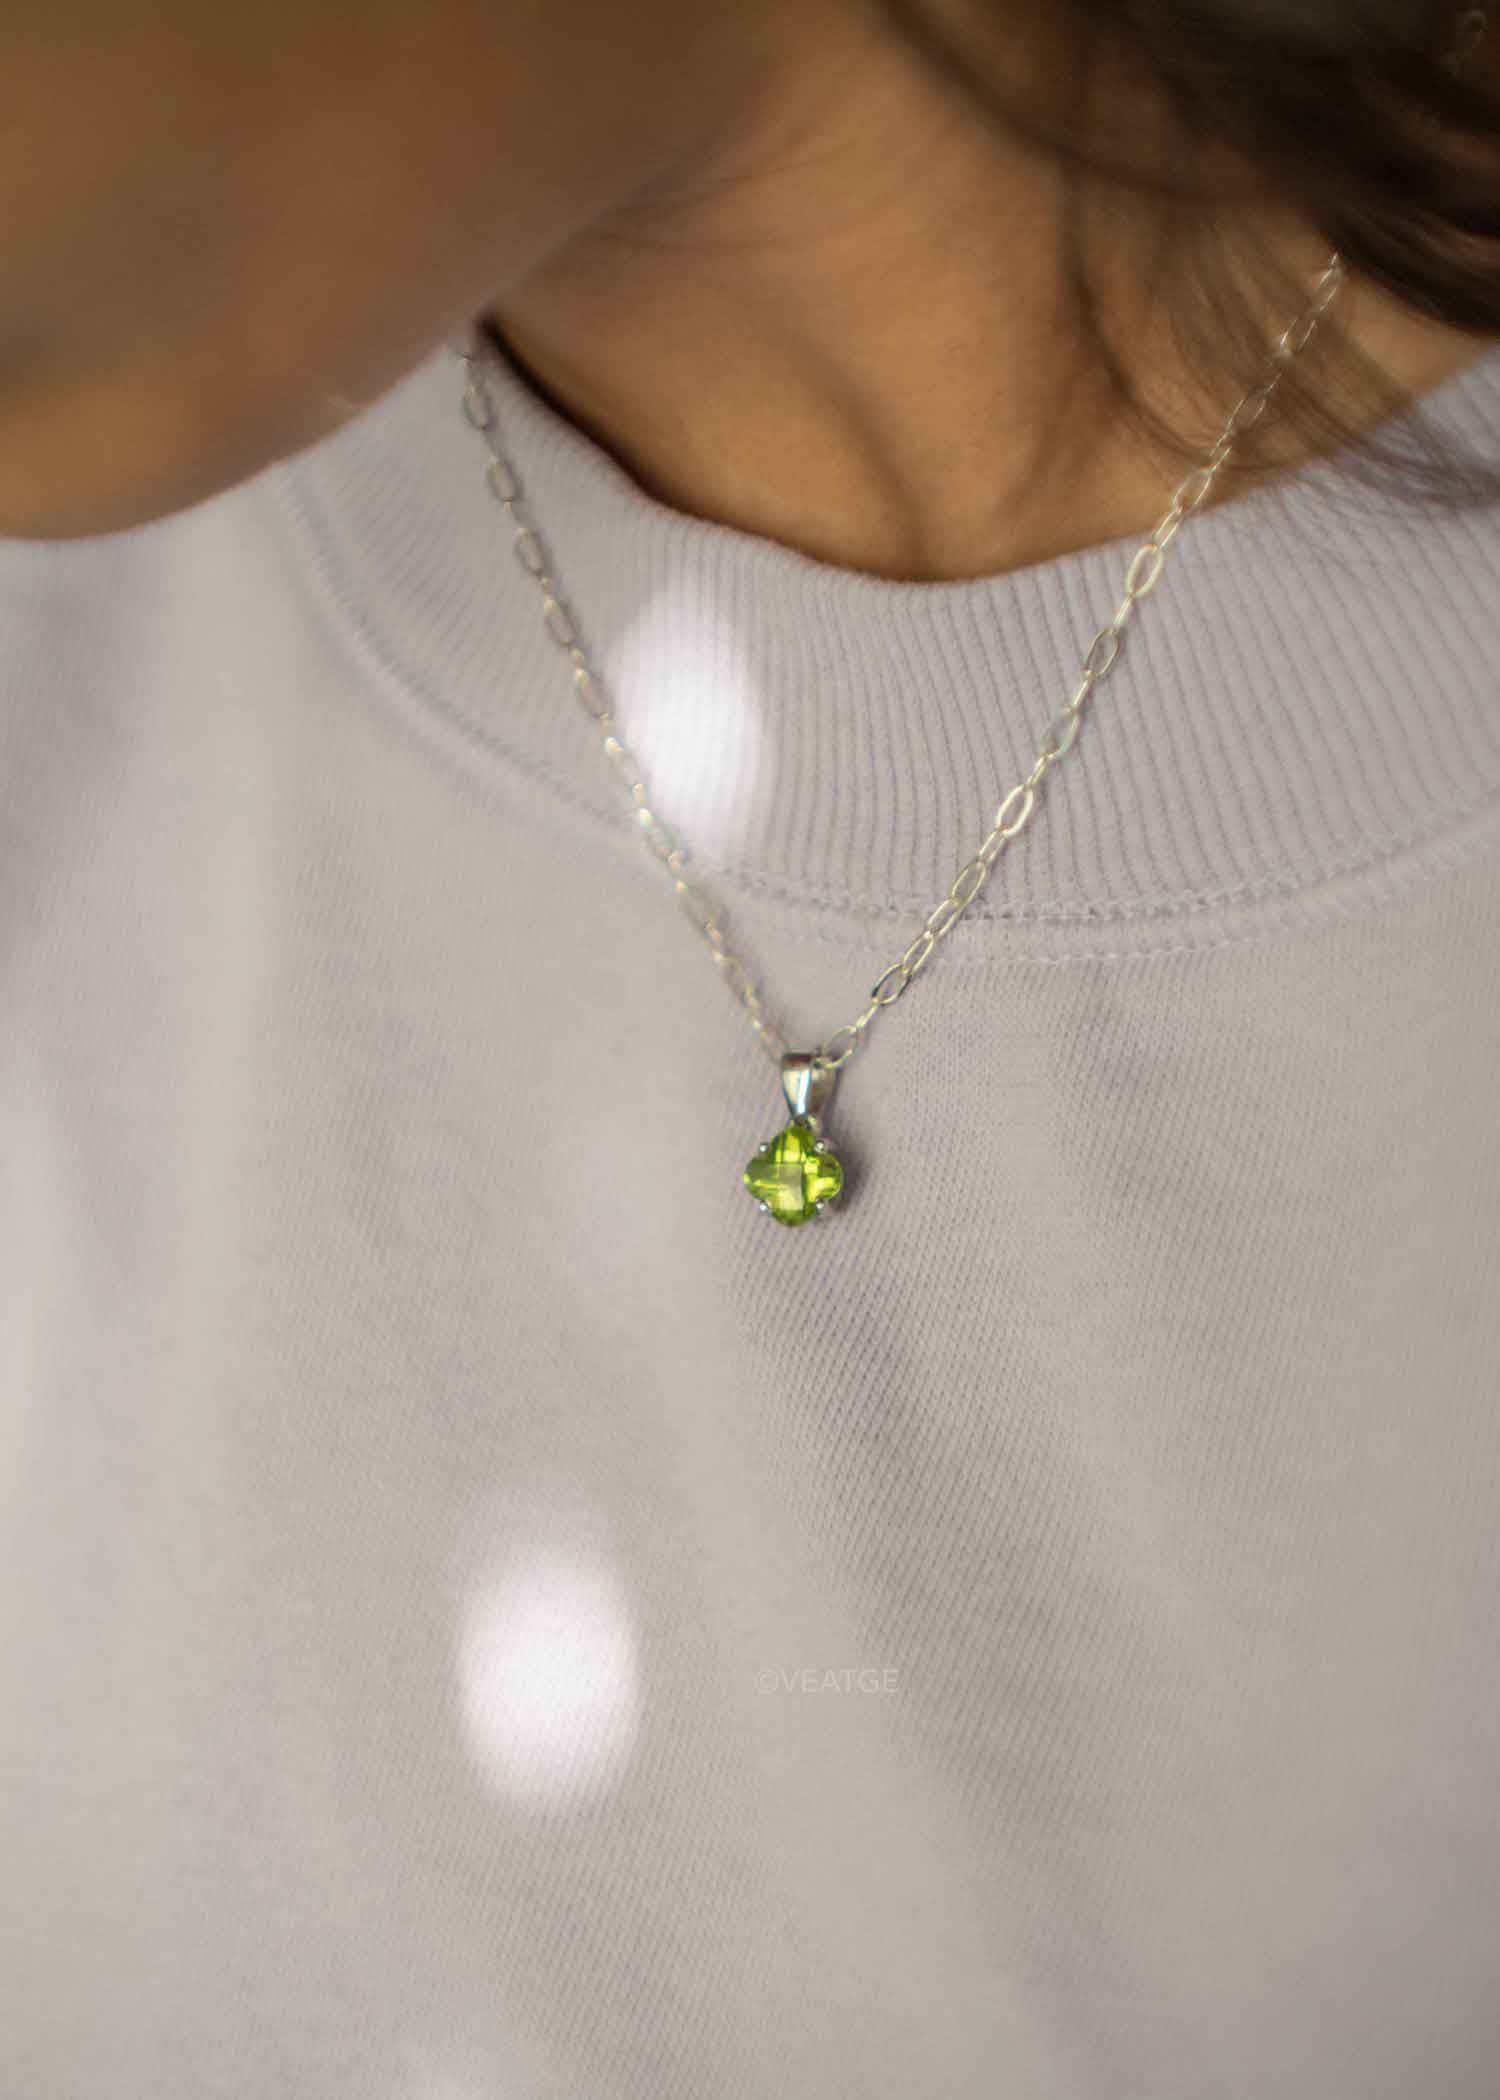 Peridot Necklace Minimalist Clover Gemstone Necklace in Sterling Silver with removable paperclip chain, Good Luck Gift August Birthstone